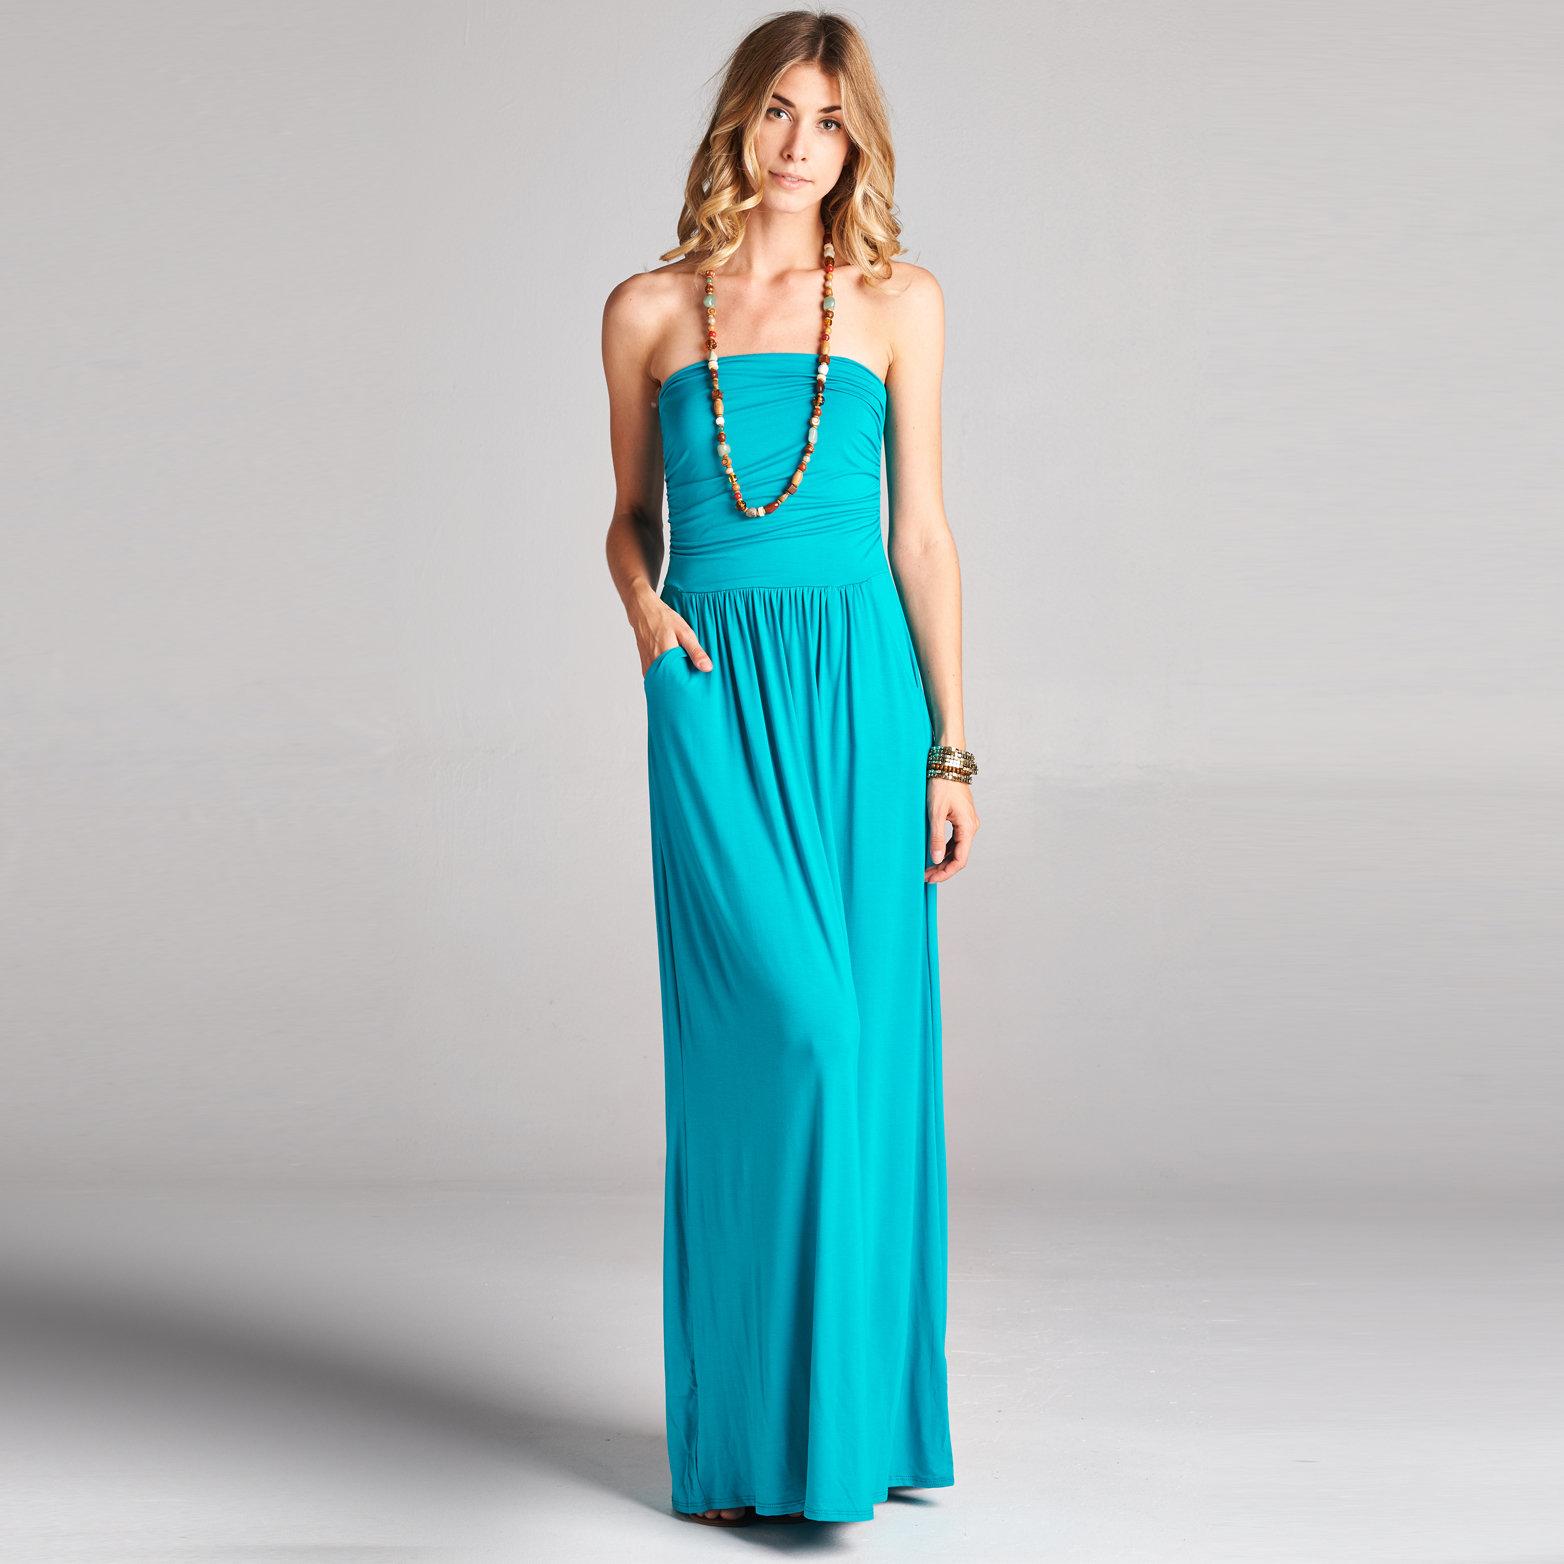 Atlantis Strapless Maxi Dress With Pockets In 6 Colors - Teal, Small (4-6)